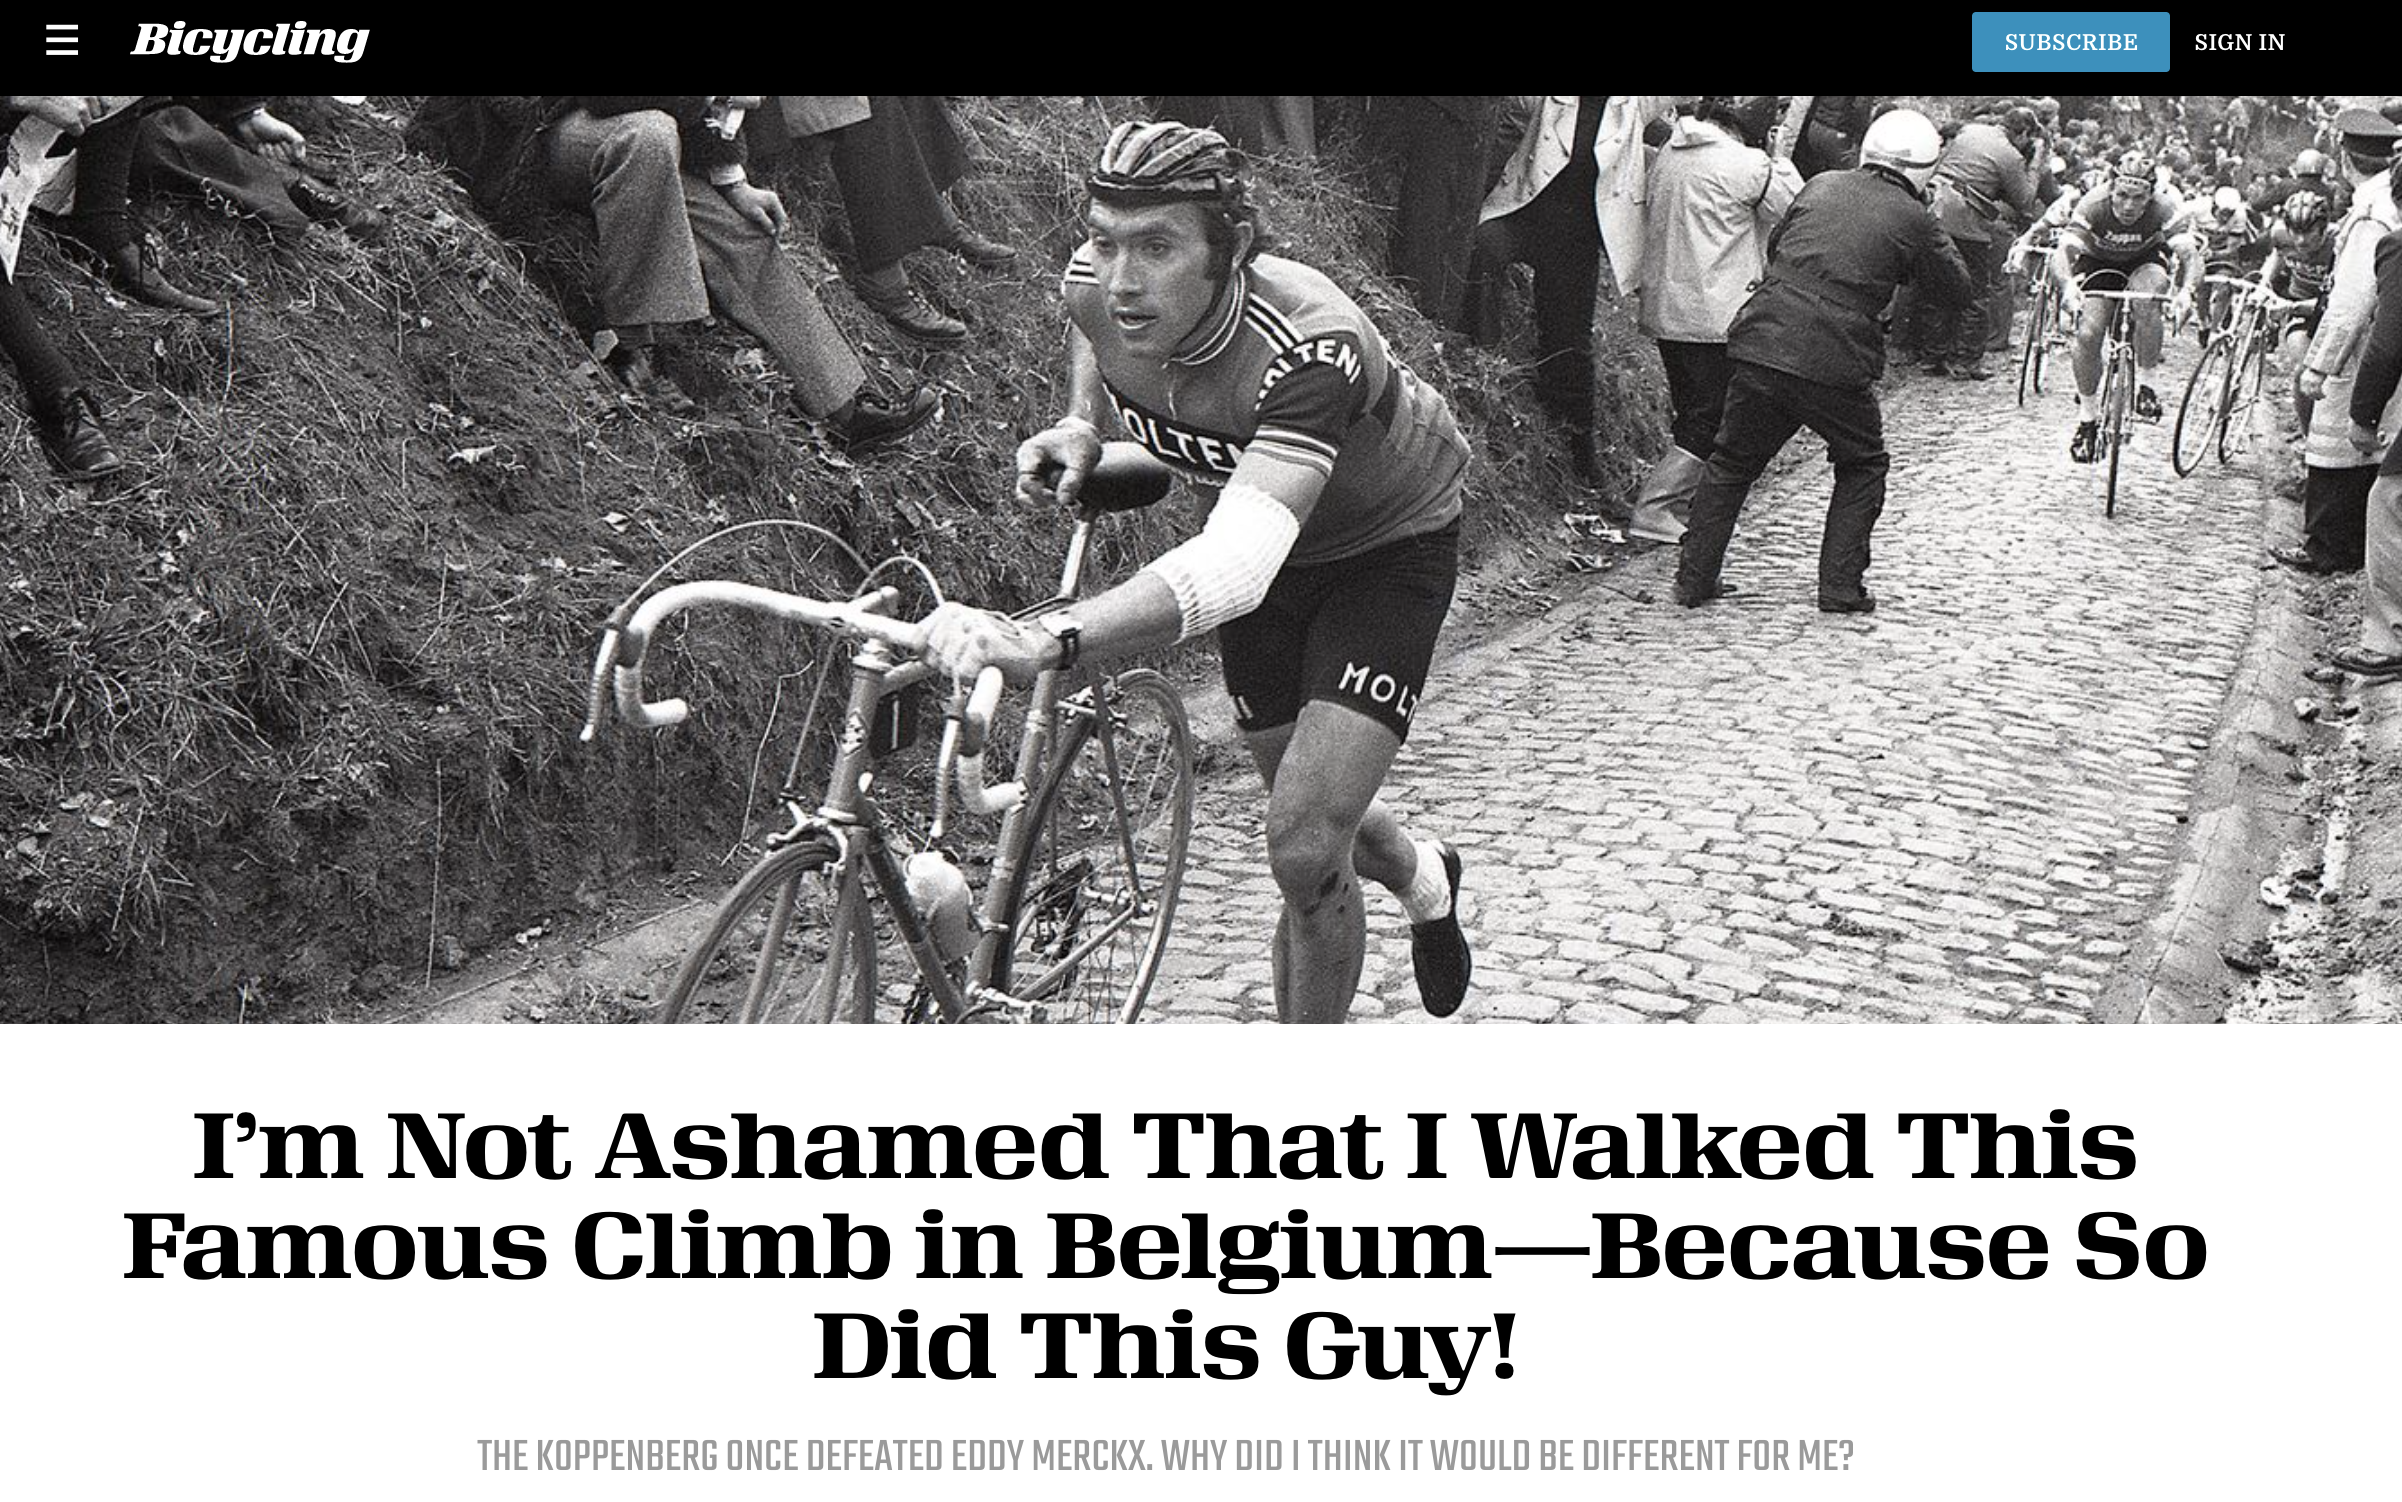 I’m Not Ashamed That I Walked This Famous Climb in Belgium—Because So Did This Guy!